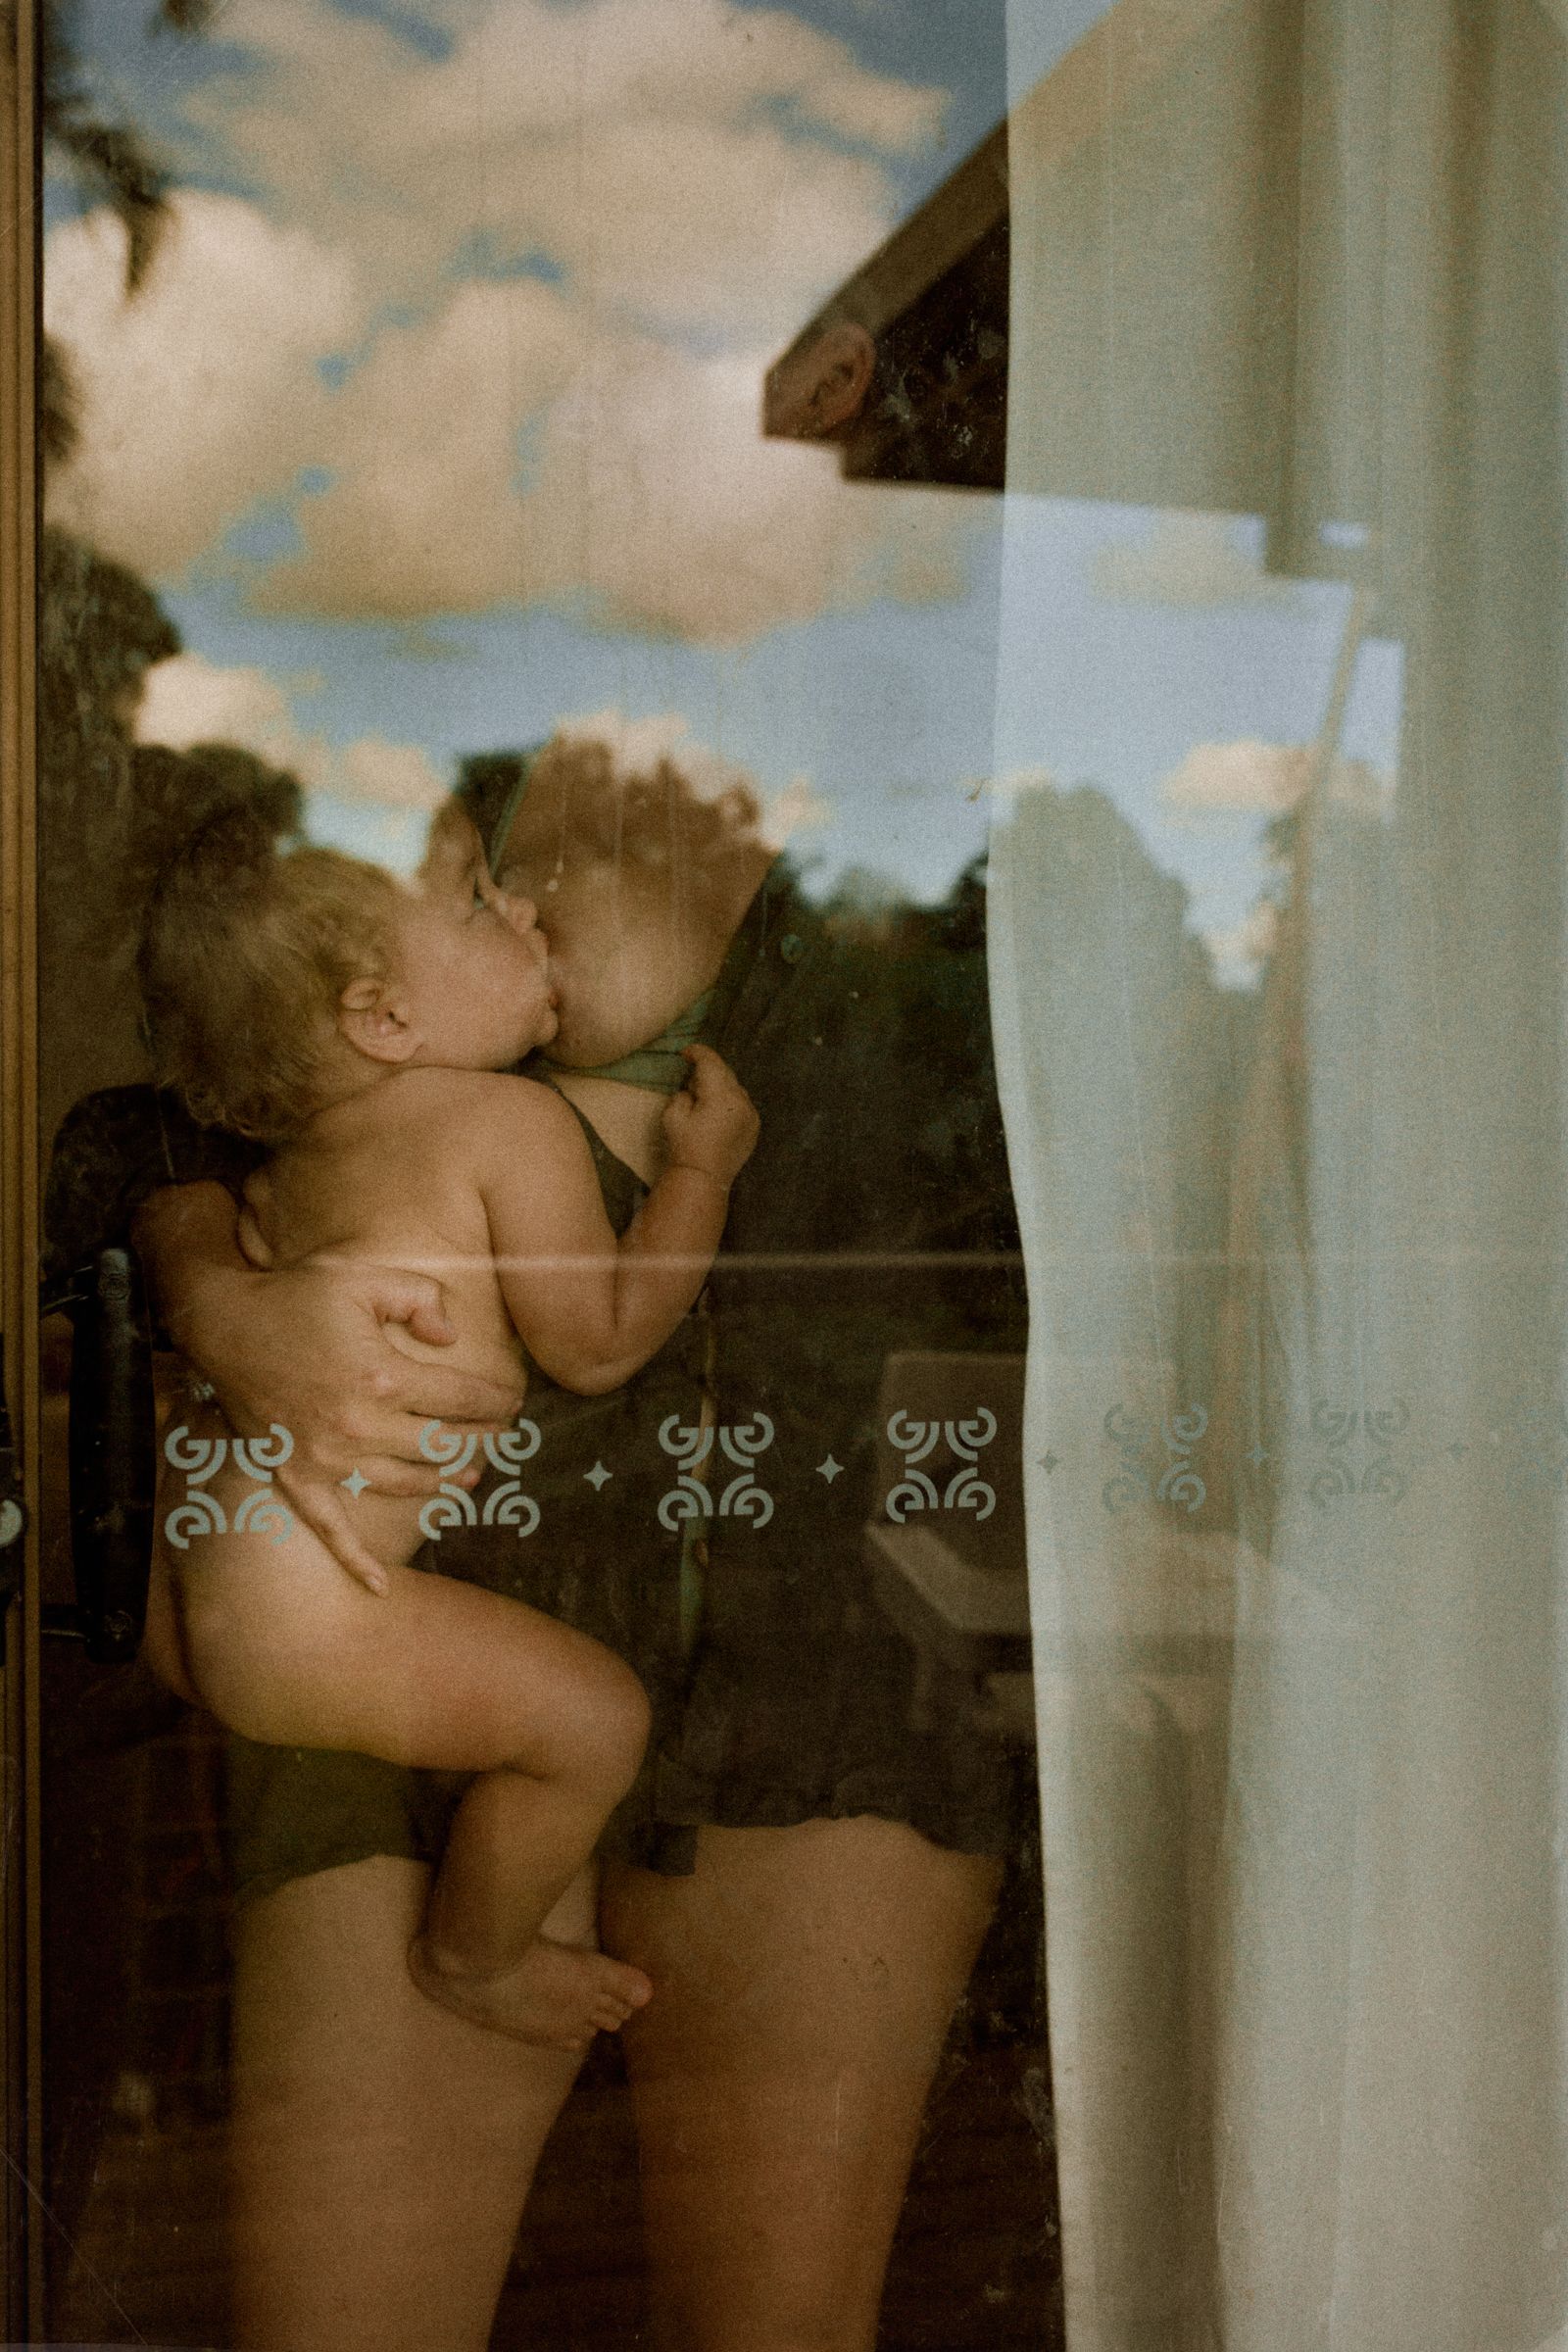 © Lisa Sorgini - Image from the Behind Glass photography project